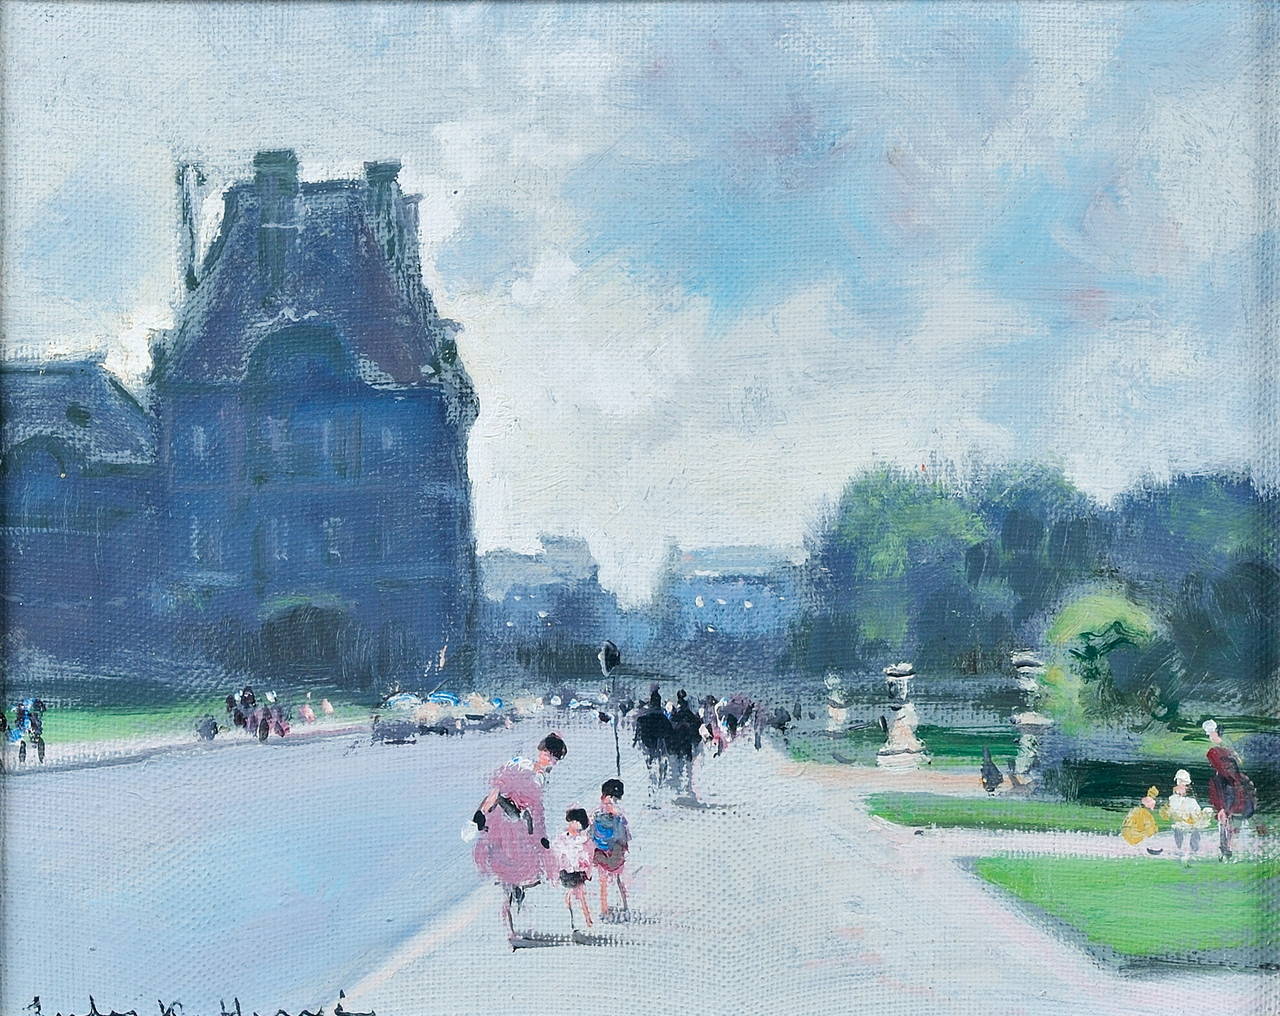 Tuileries Gardens in Paris.
Jules René Hervé (French, 1887-1981).
Oil on canvas.
Signed lower left, also signed on the reverse.
22 x 26.5 cm (8.6